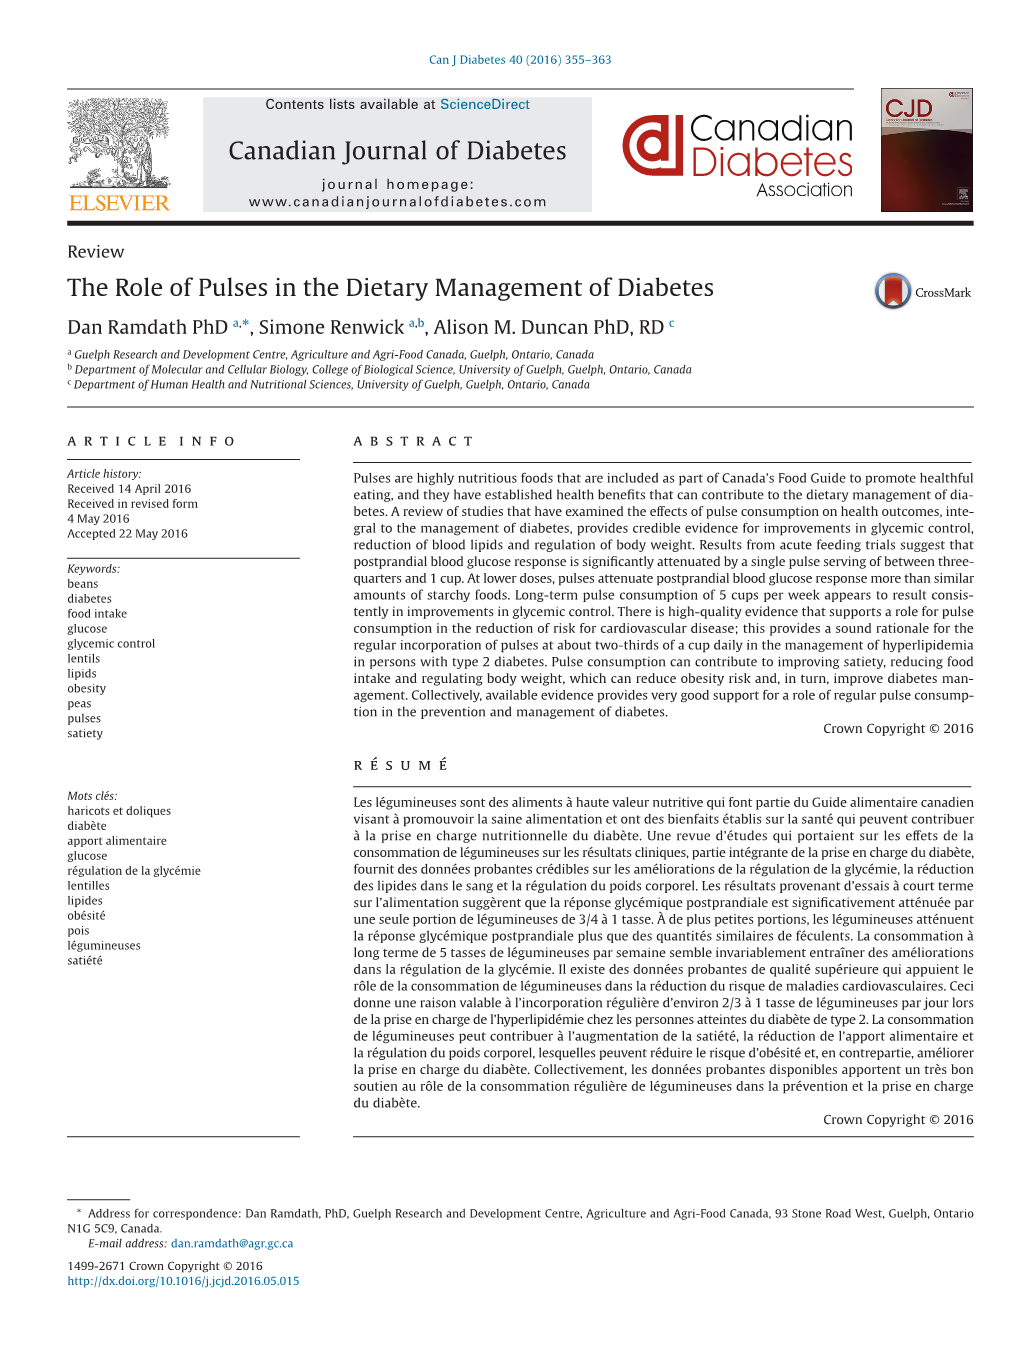 The Role of Pulses in the Dietary Management of Diabetes Dan Ramdath Phd A,*, Simone Renwick A,B, Alison M